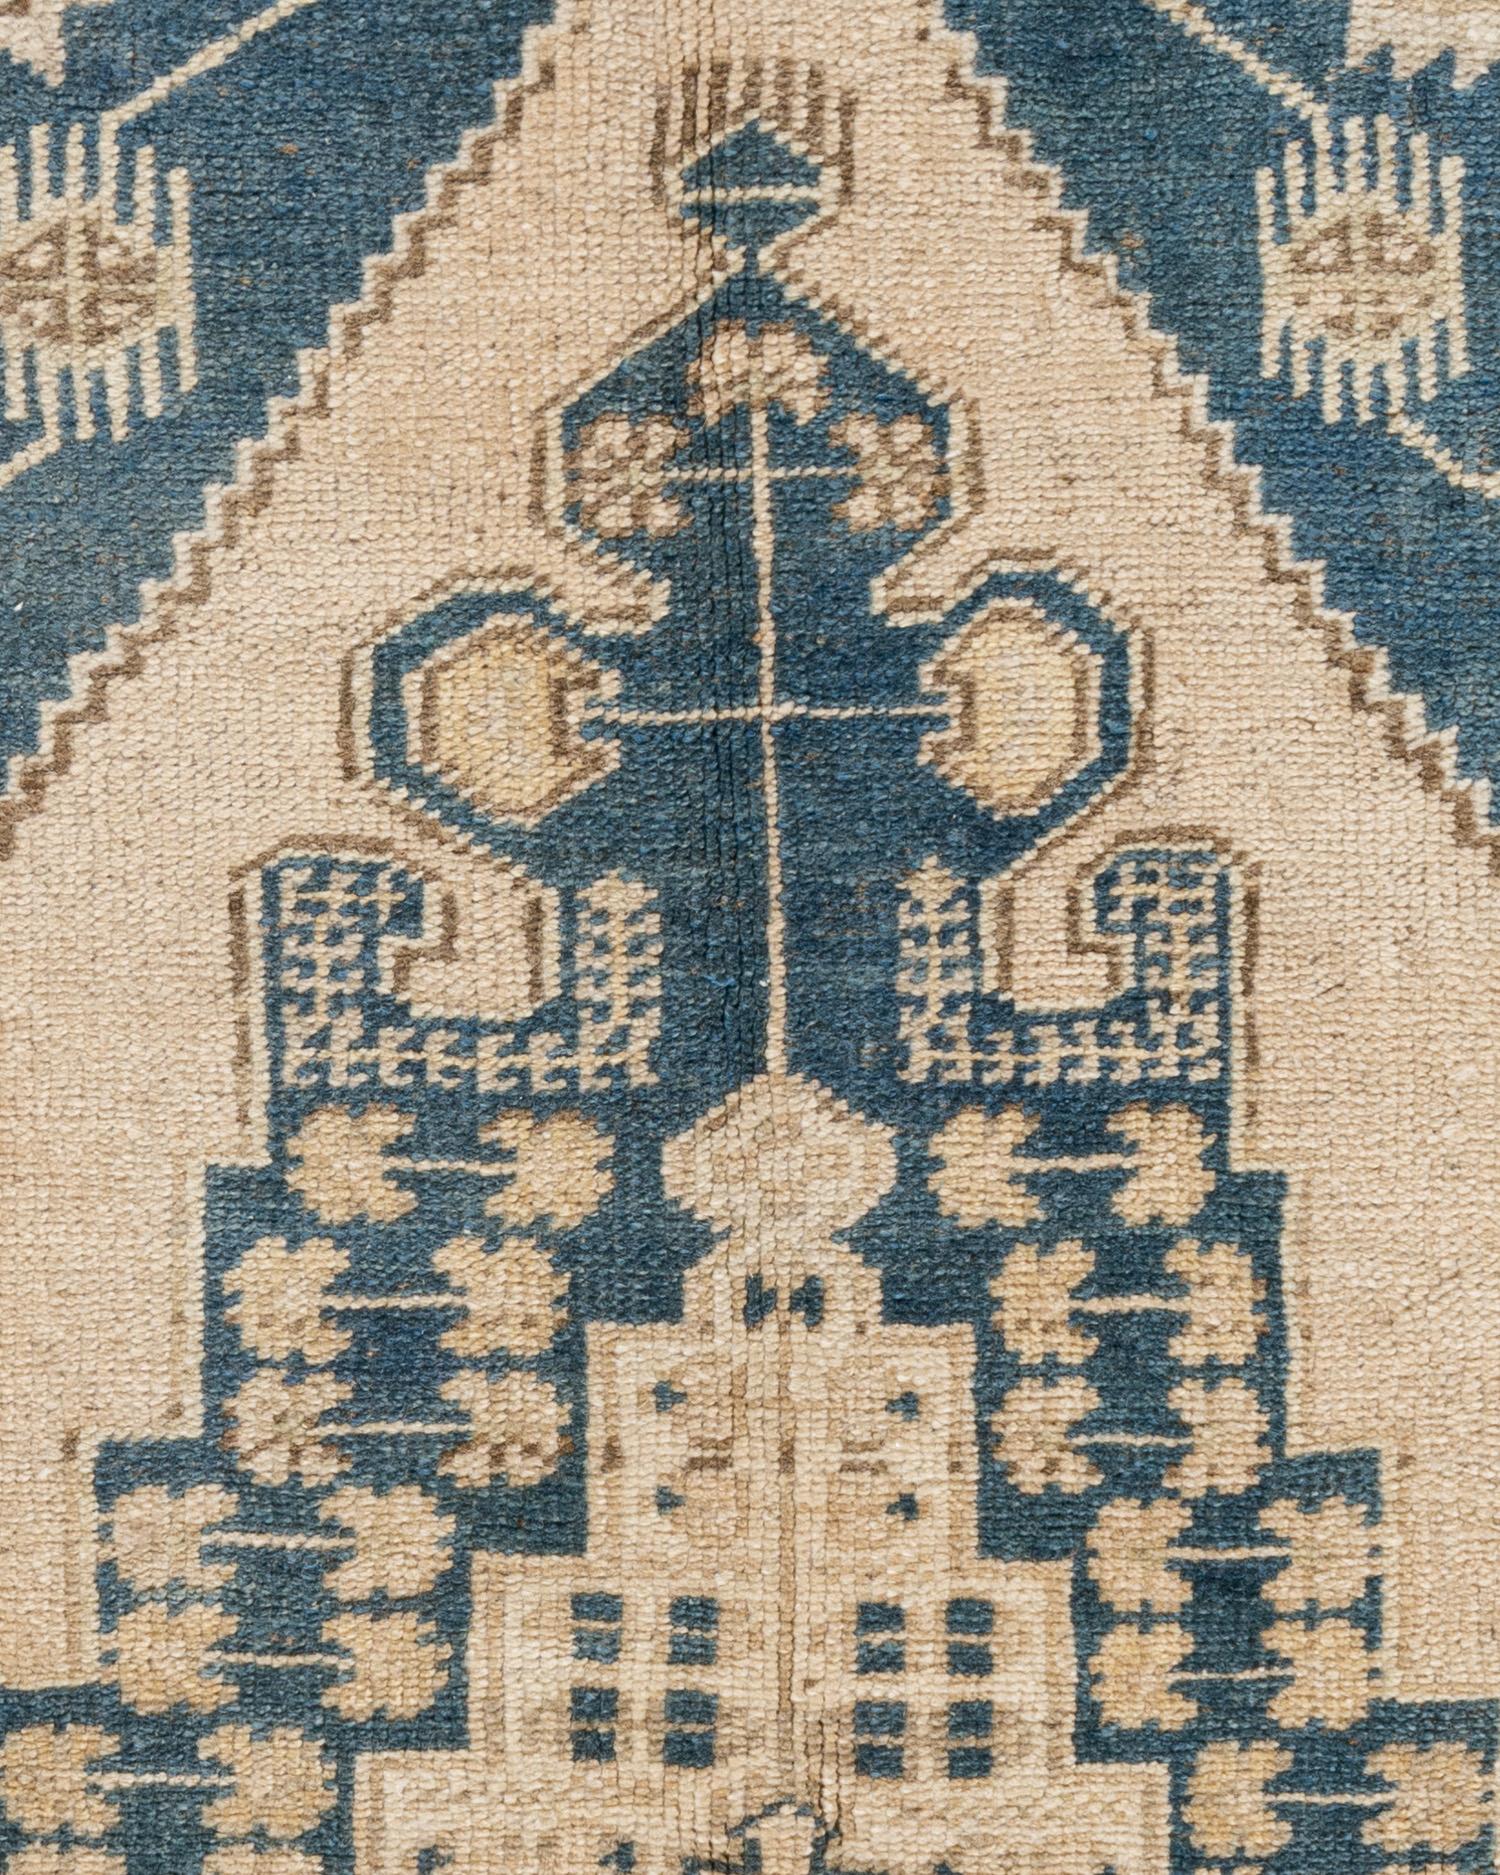 Vintage Beige Turkish Oushak Area Rug 3'7 X 5'8. Oushak's are known for their soft palettes combined with eccentric drawing. Oushak in western Turkey has the longest continuous rug weaving history, stretching back at least to the mid-fifteenth